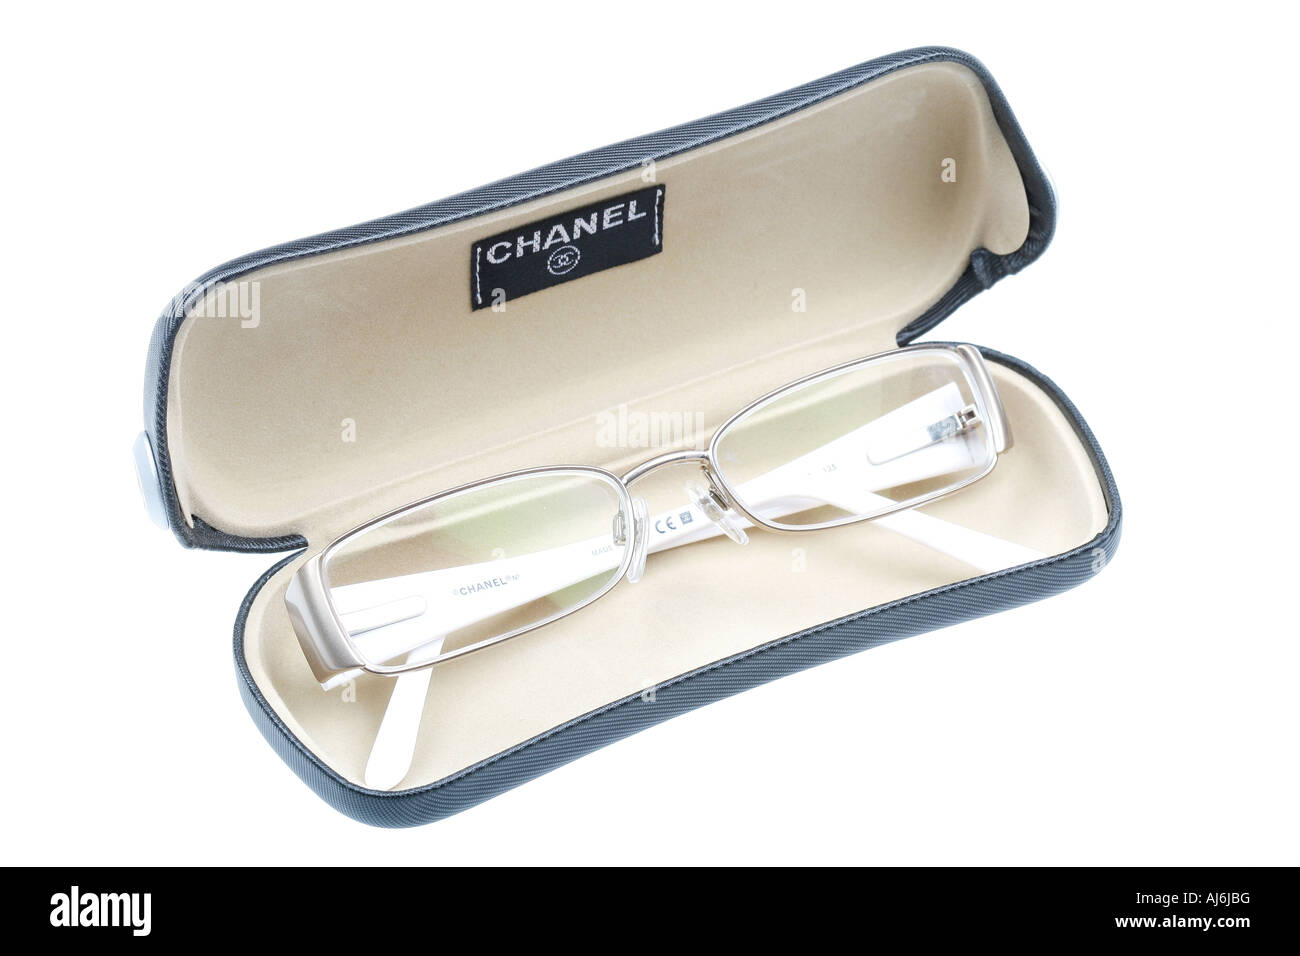 Chanel glasses designer case Cut Out Stock Images & Pictures - Alamy